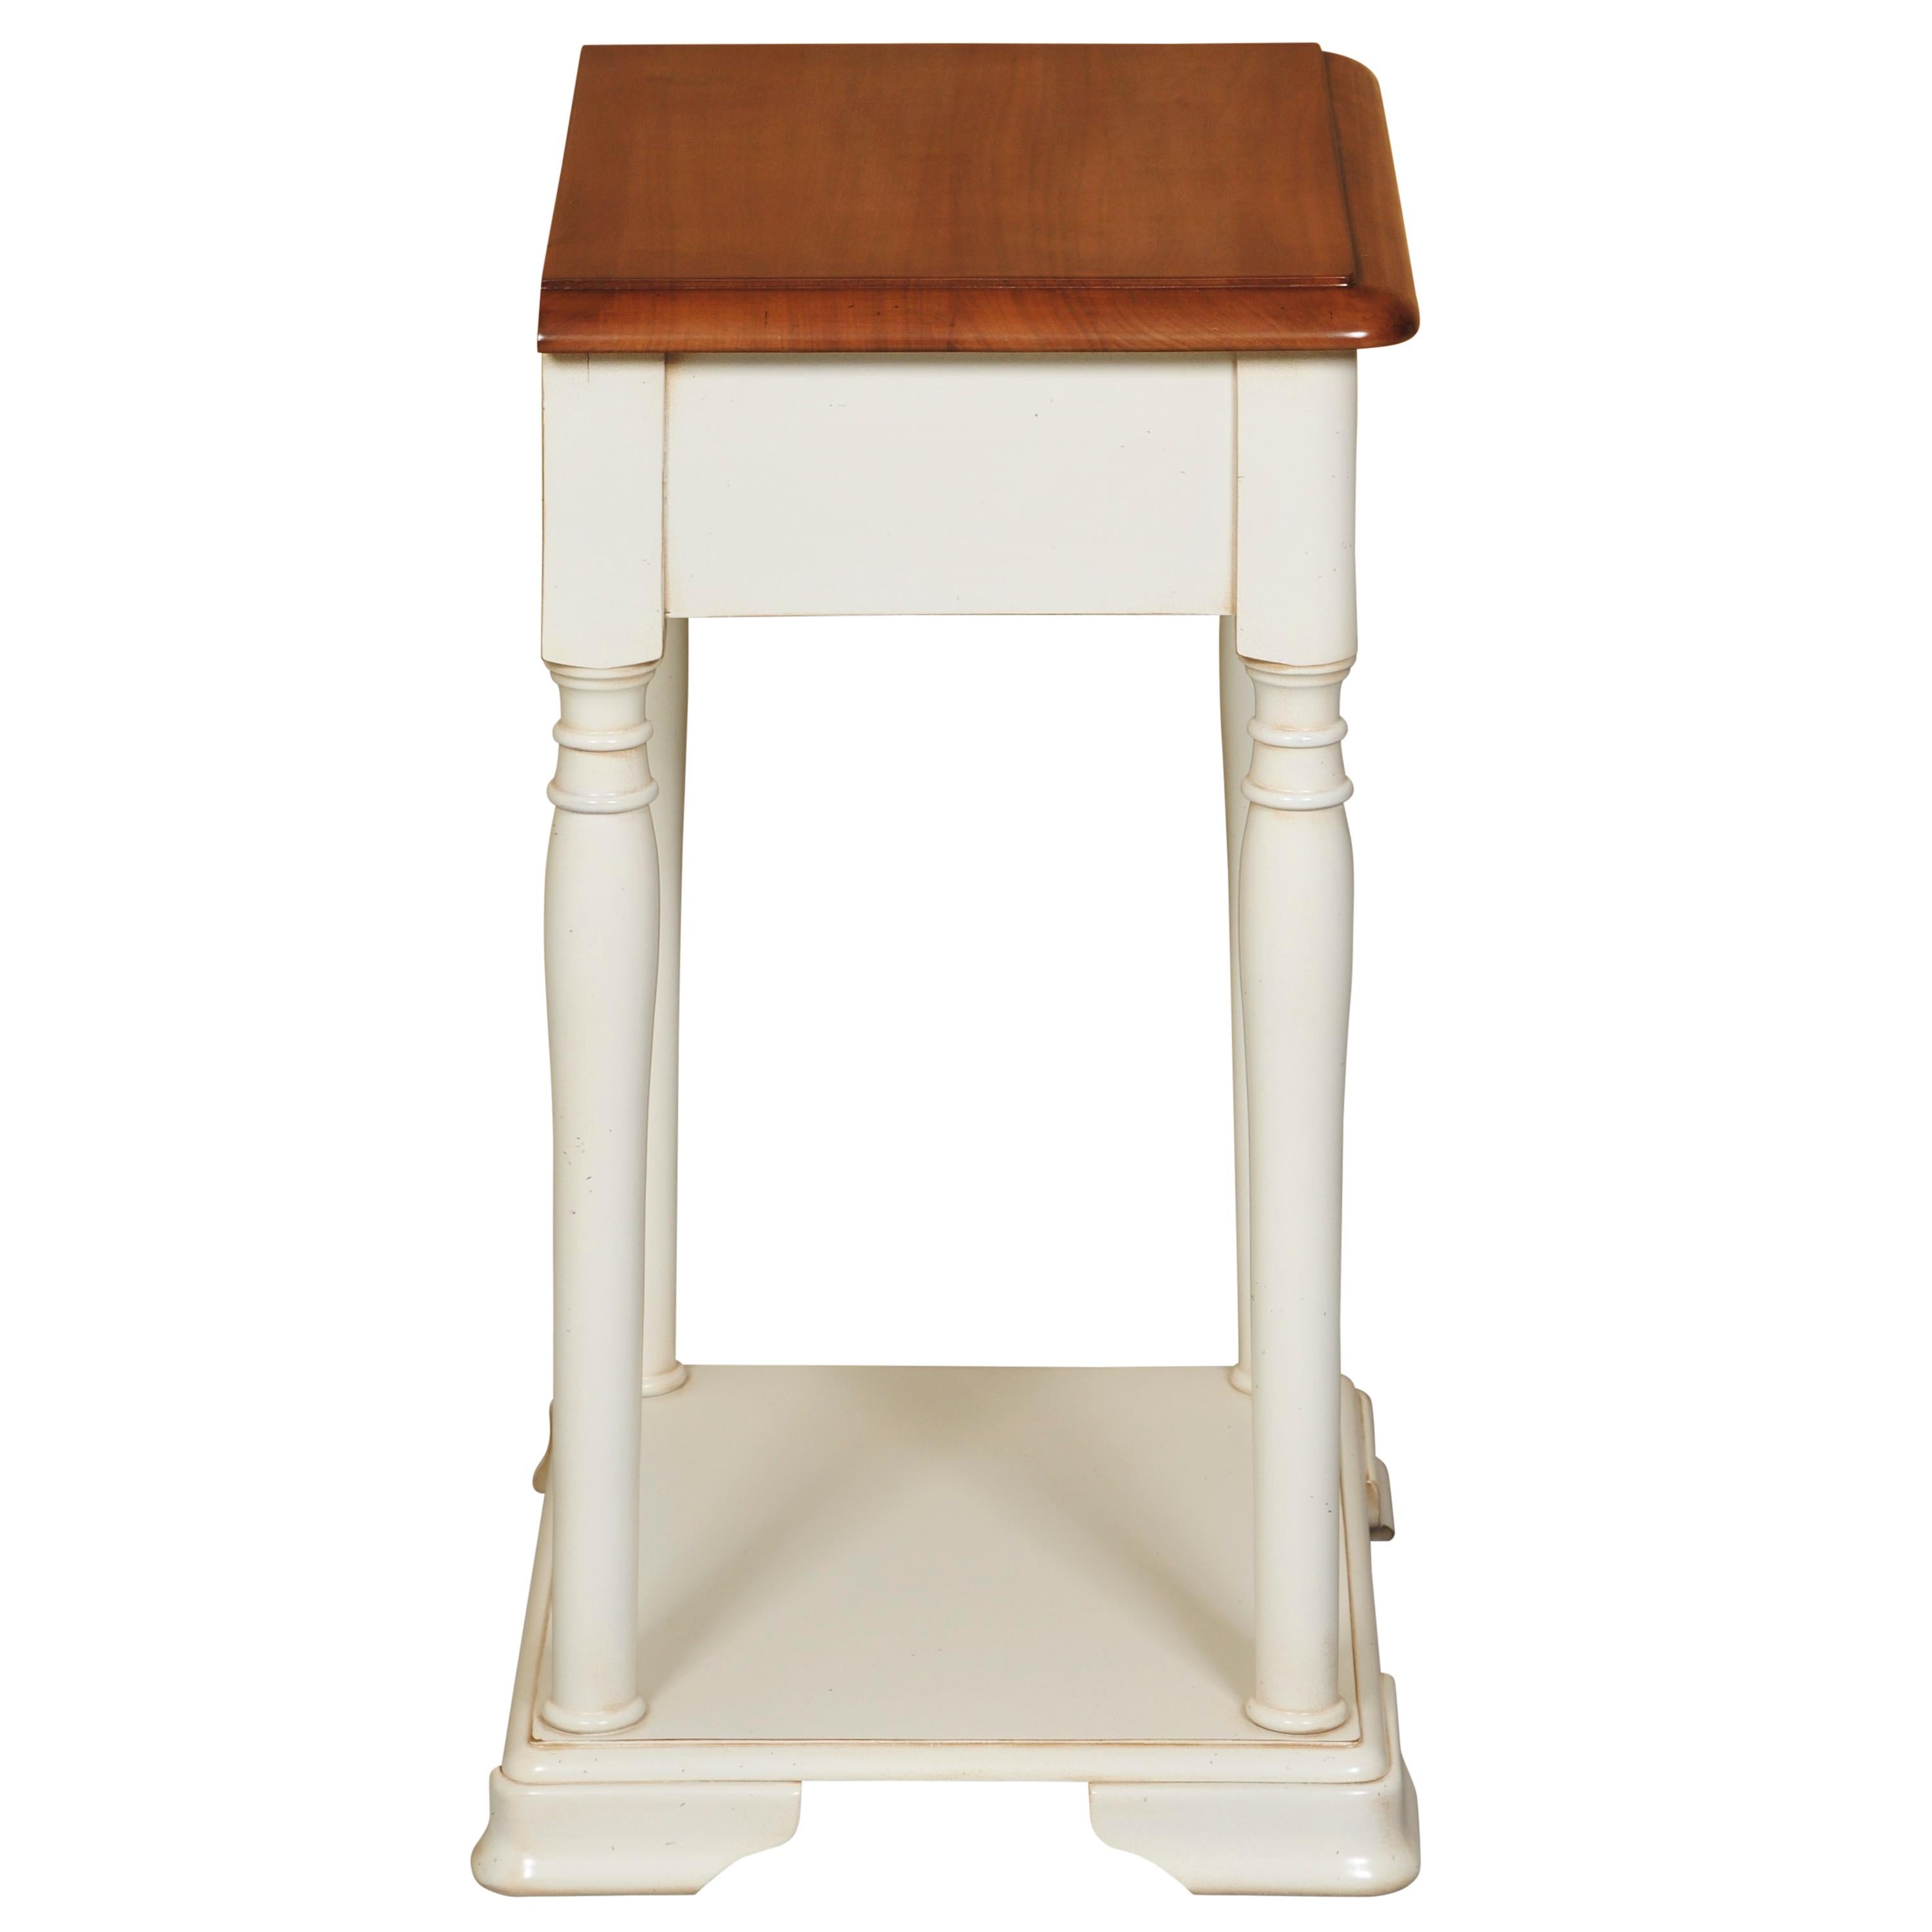 Louis Philippe Style Bedside Table, Blond Cherry and White, Cream Lacquered For Sale 4